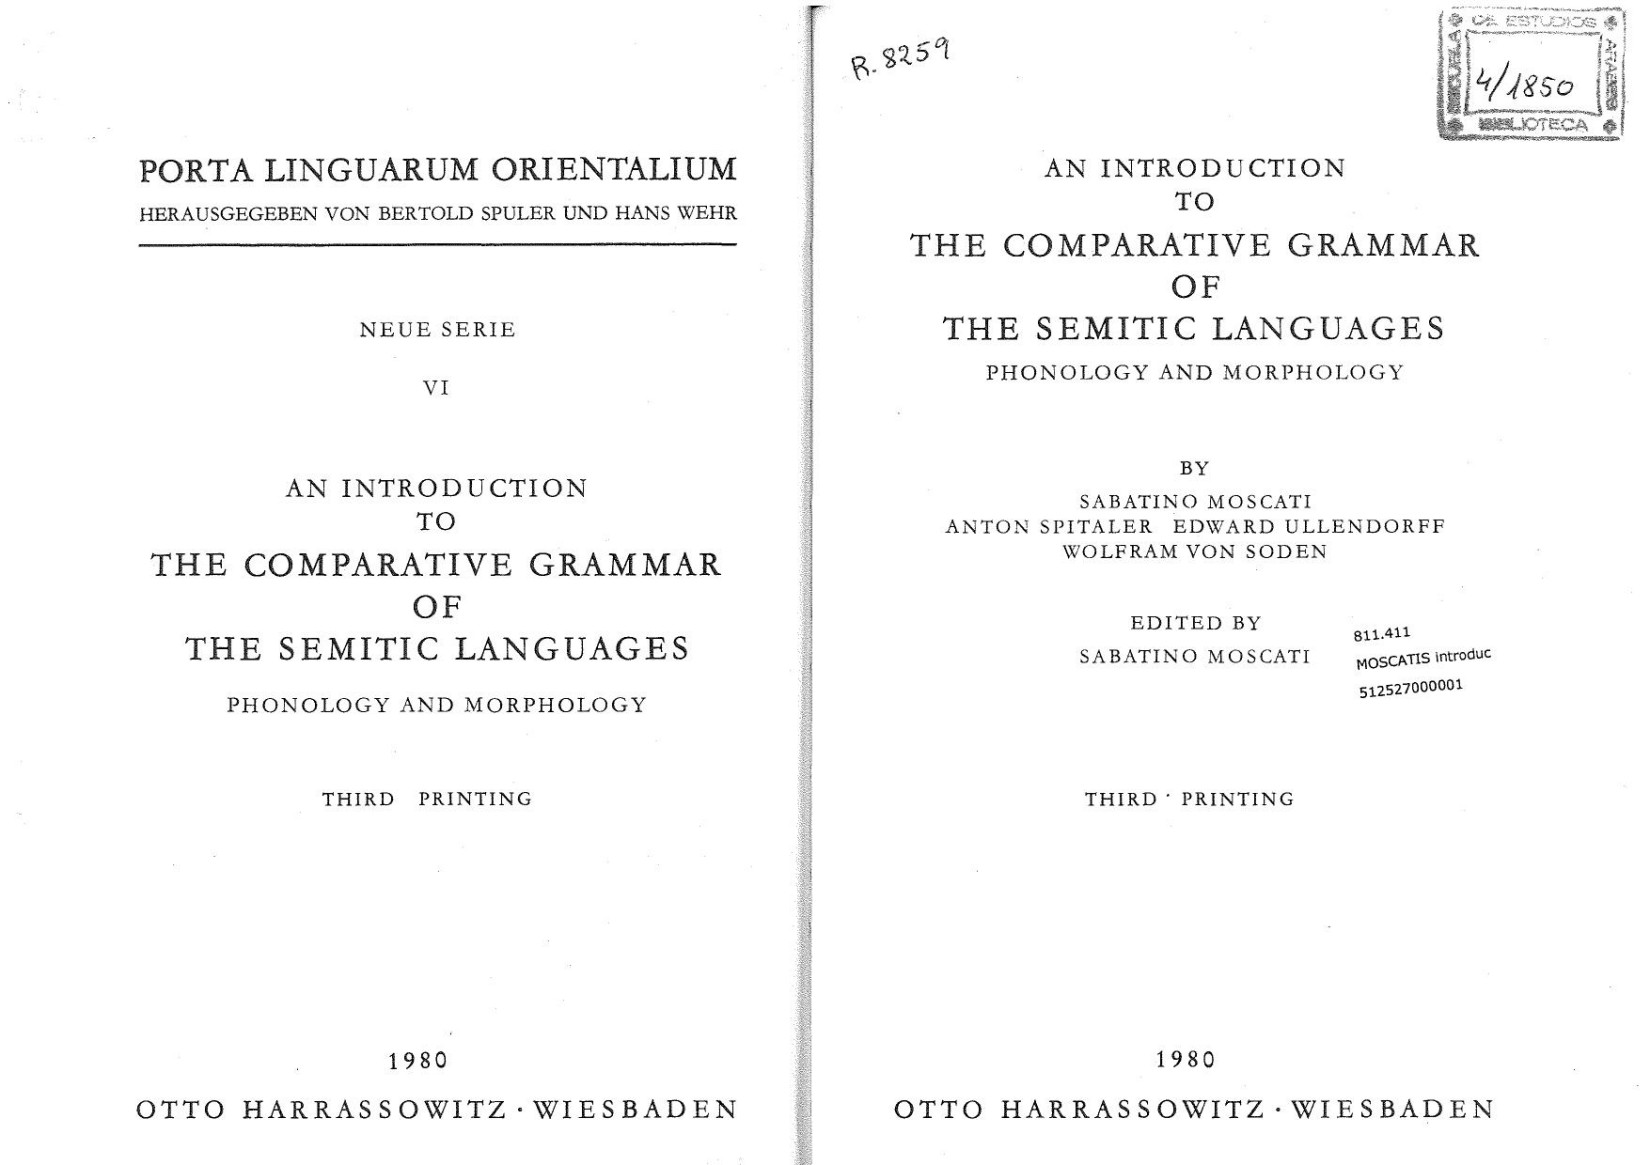 An Introduction to the Comparative Grammar of the Semitic Languages Phonology and Morphology (Porta Linguarum Orientalium)